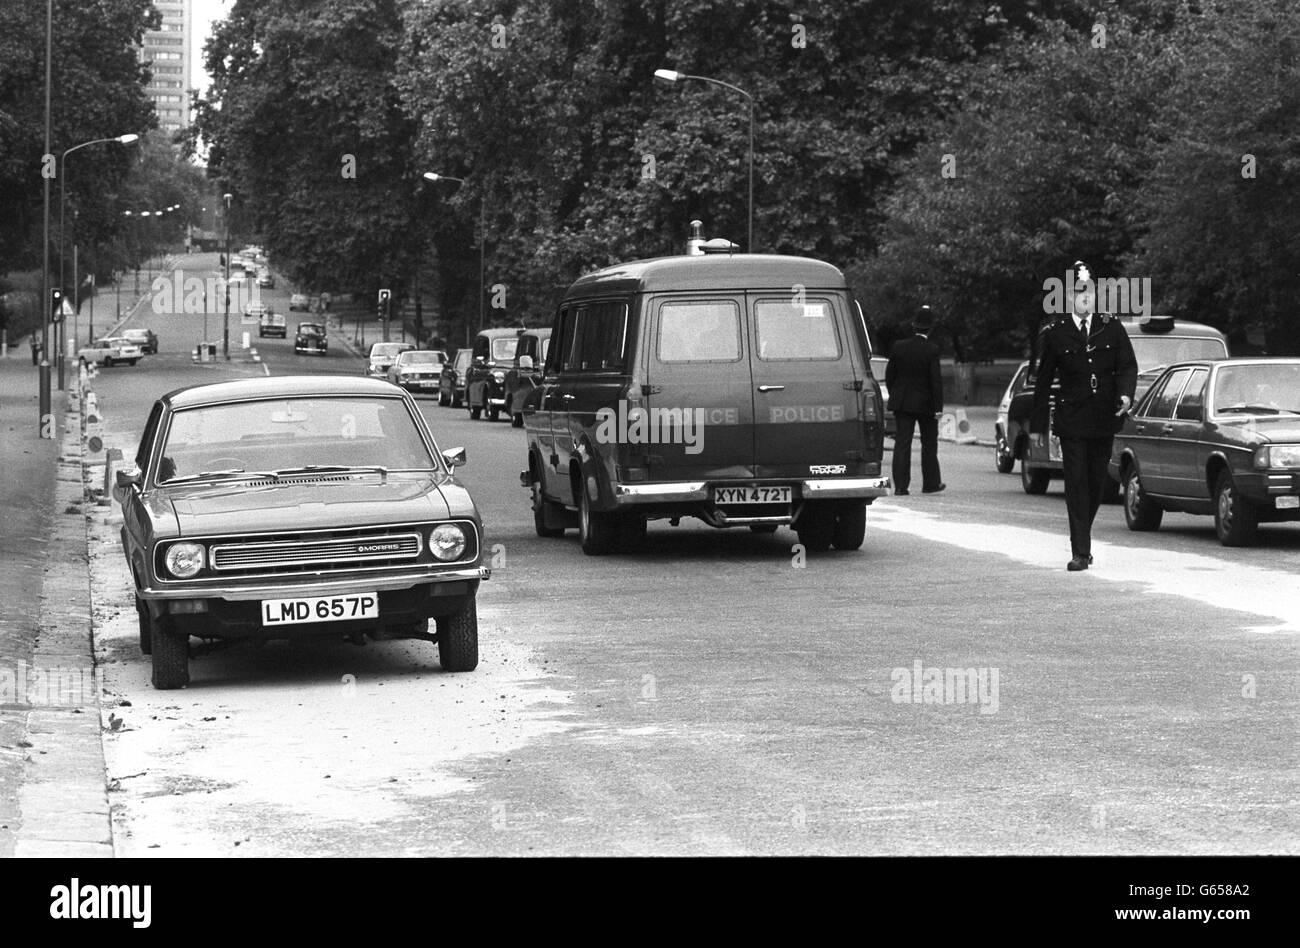 Police activity on South Carriage Road, Hyde Park, London, where the bomb exploded killing three members of the Blues and Royals. The car (left) is similar to the Blue Marina, with the same registration number, that contained the radio-controlled bomb in its boot. Stock Photo